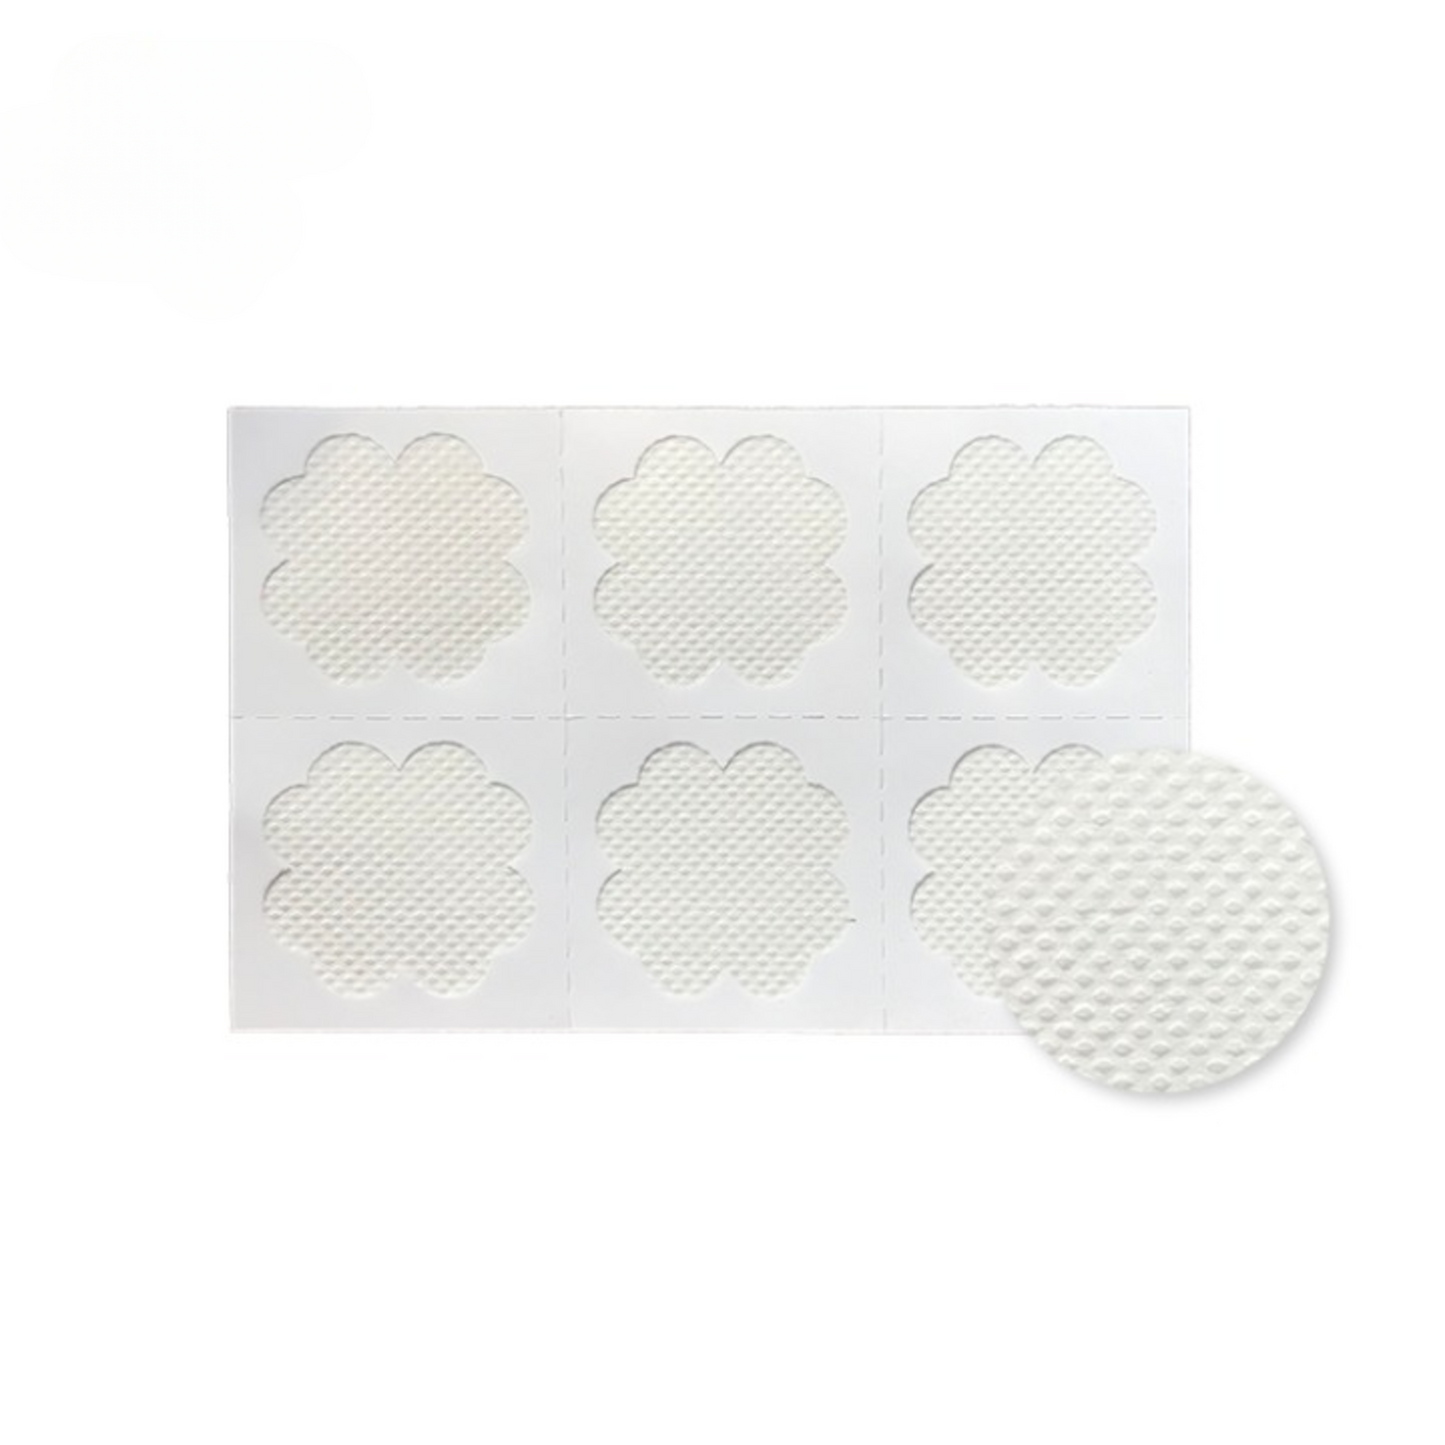 XUAN WU YAN - CAPSIUM PLASTER - MOSQUITO REPELLENT PATCH (12 PIECE)